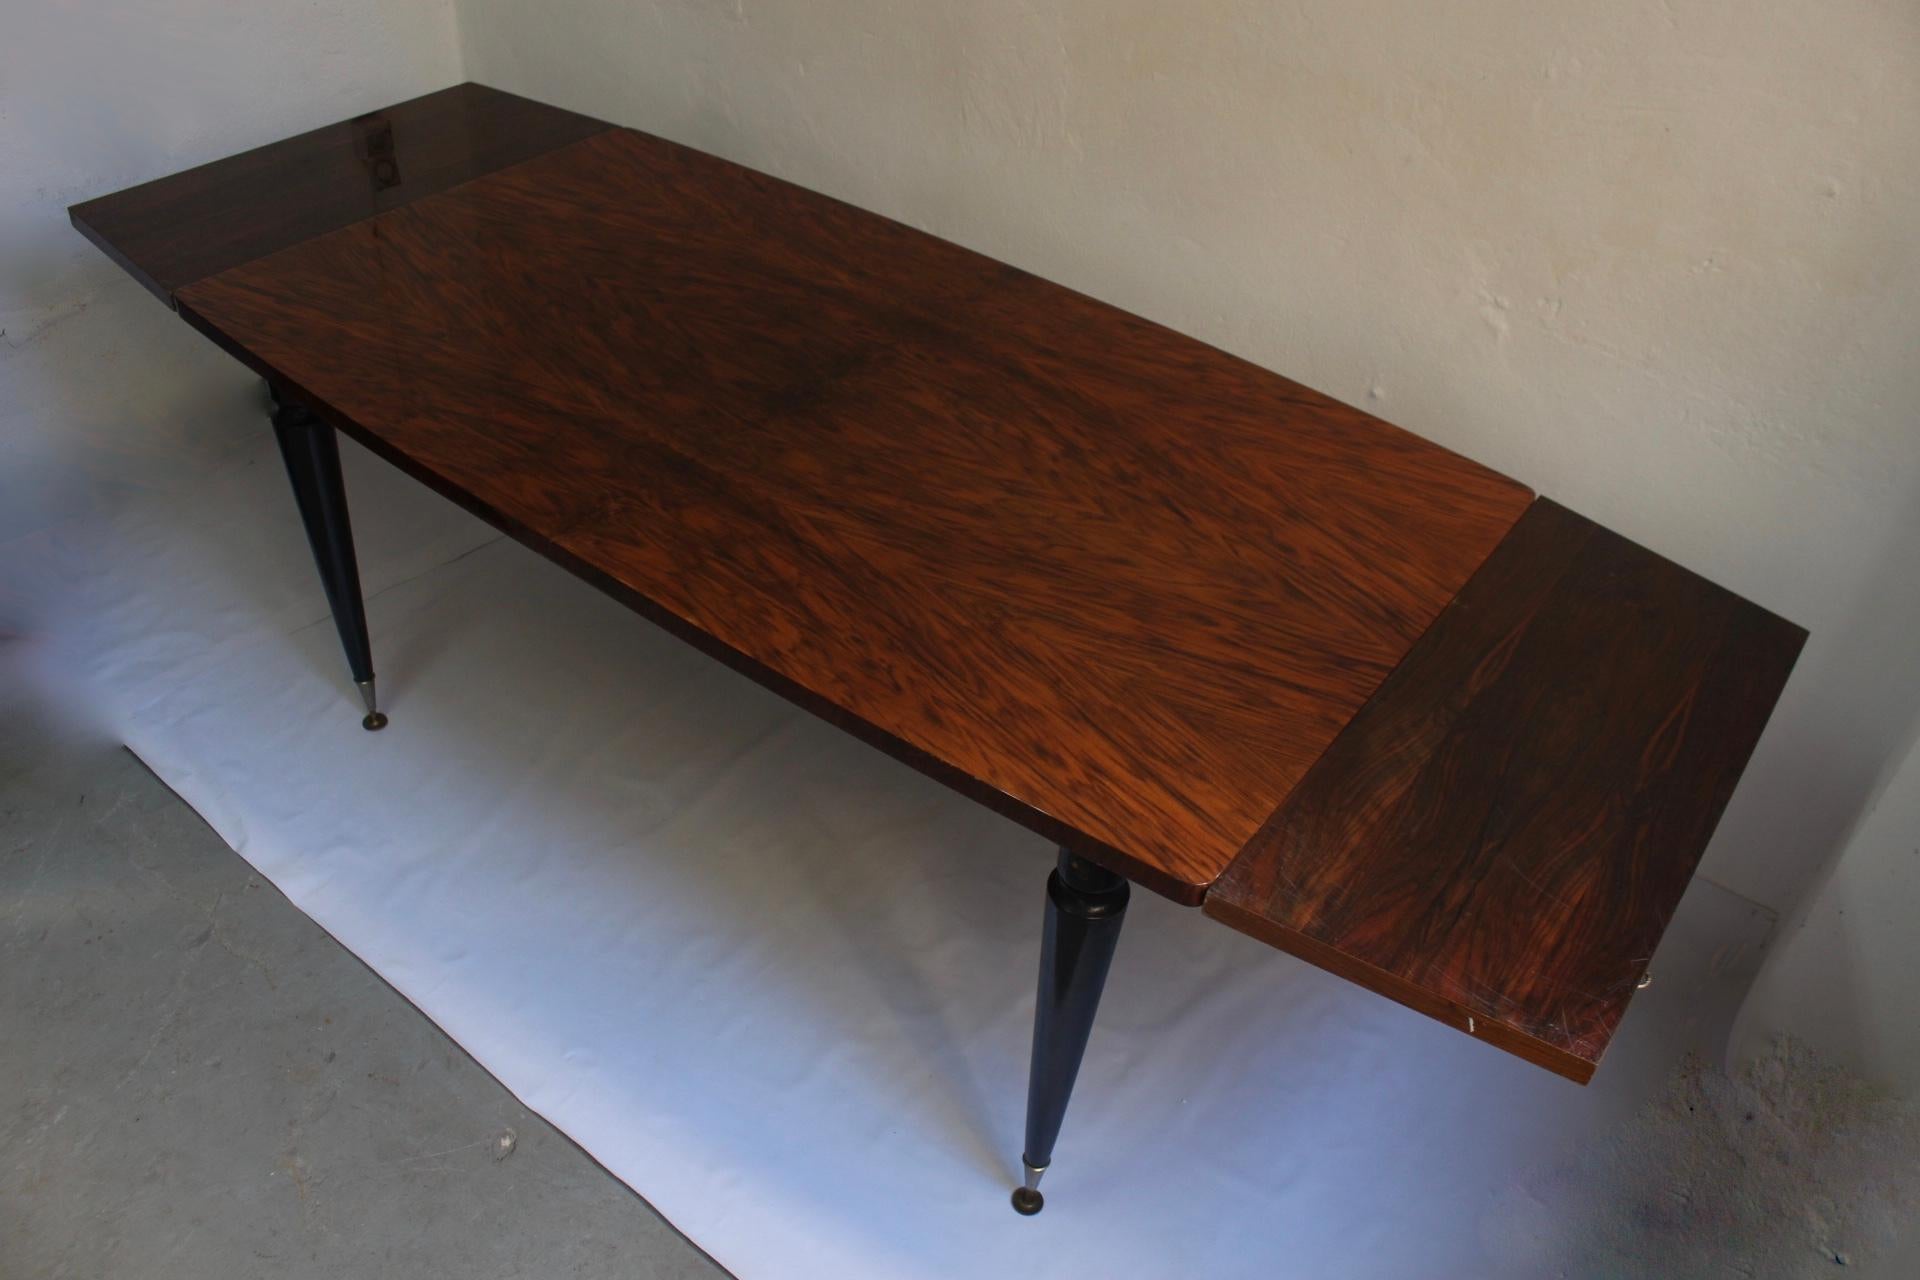 French Art Deco High Quality American Walnut Burl Extensible Dining Table, 1940s For Sale 5